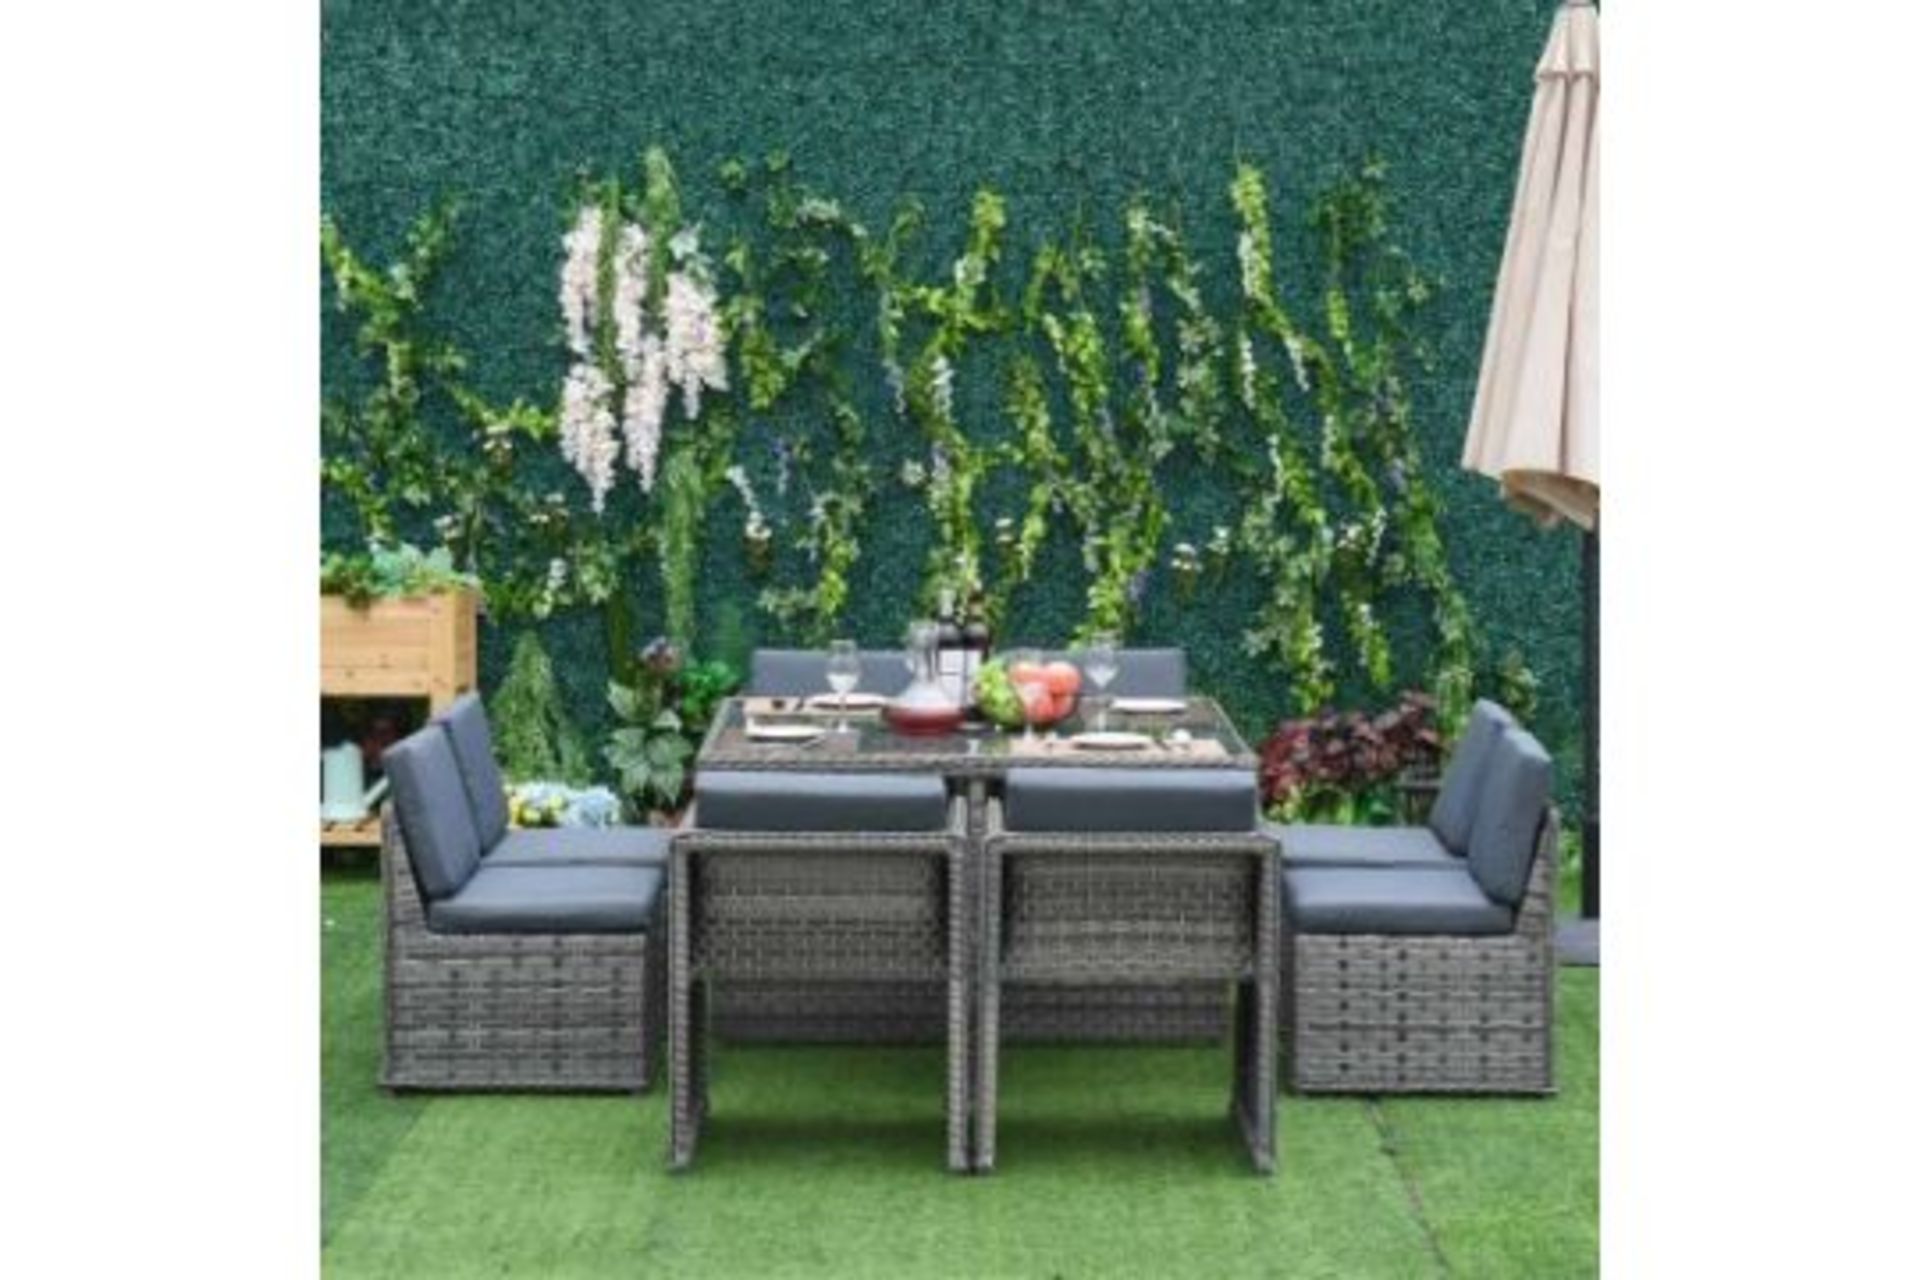 Luxury 8-Seater Patio Rattan Wicker Dining Table & Chair Set - Mixed Grey. - SR4. RRP £1,019.00.